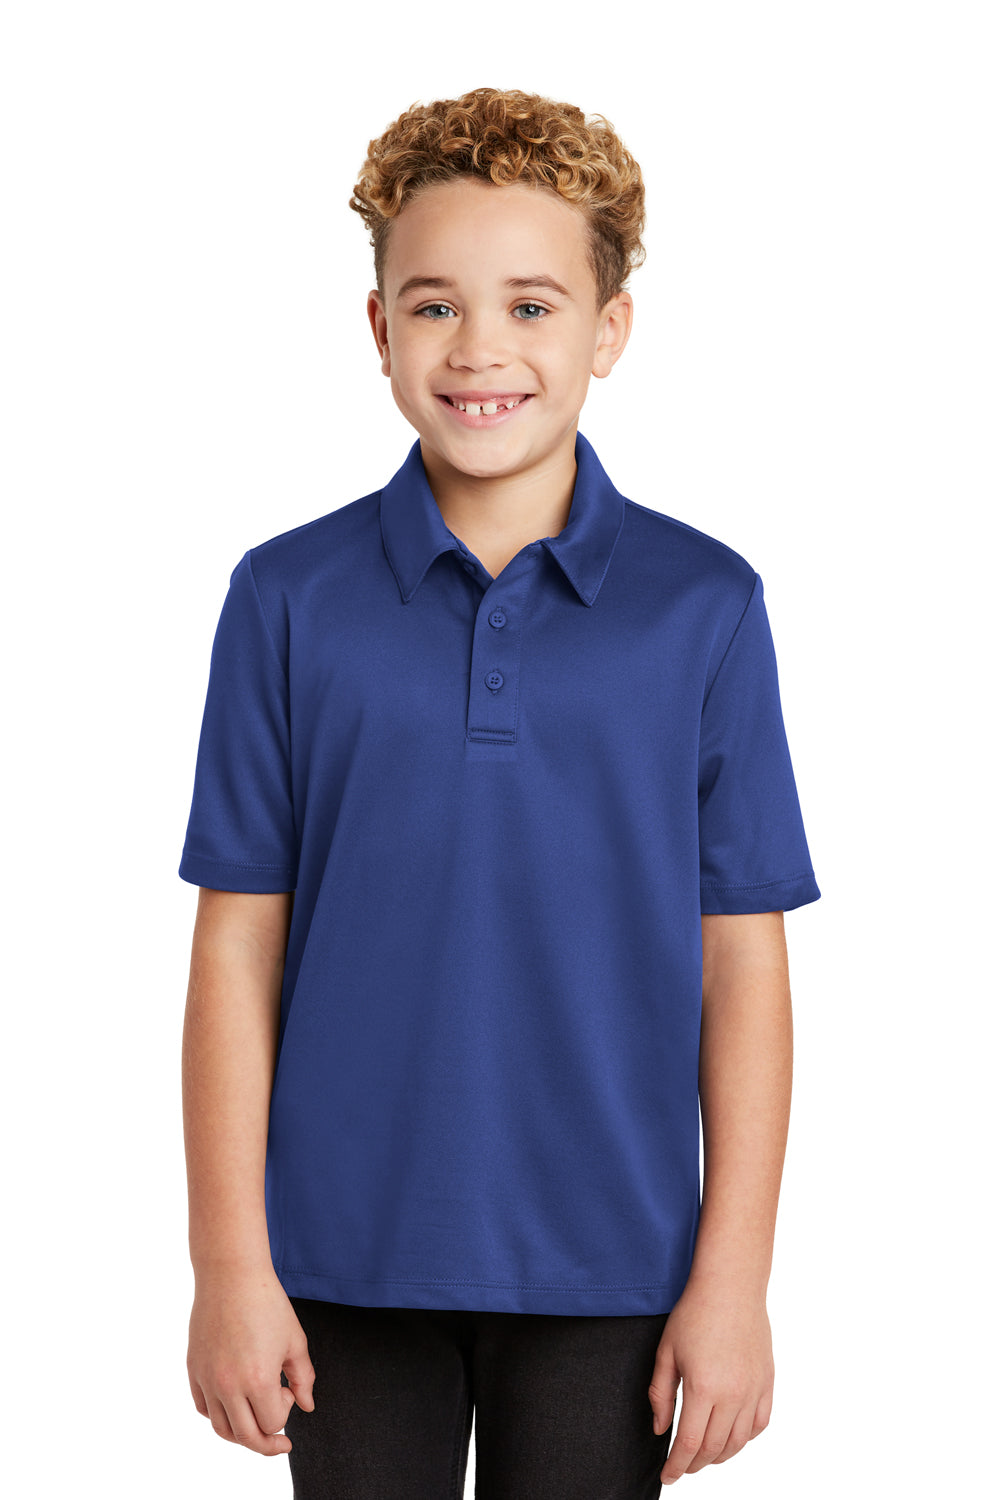 Port Authority Y540 Youth Silk Touch Performance Moisture Wicking Short Sleeve Polo Shirt Royal Blue Front